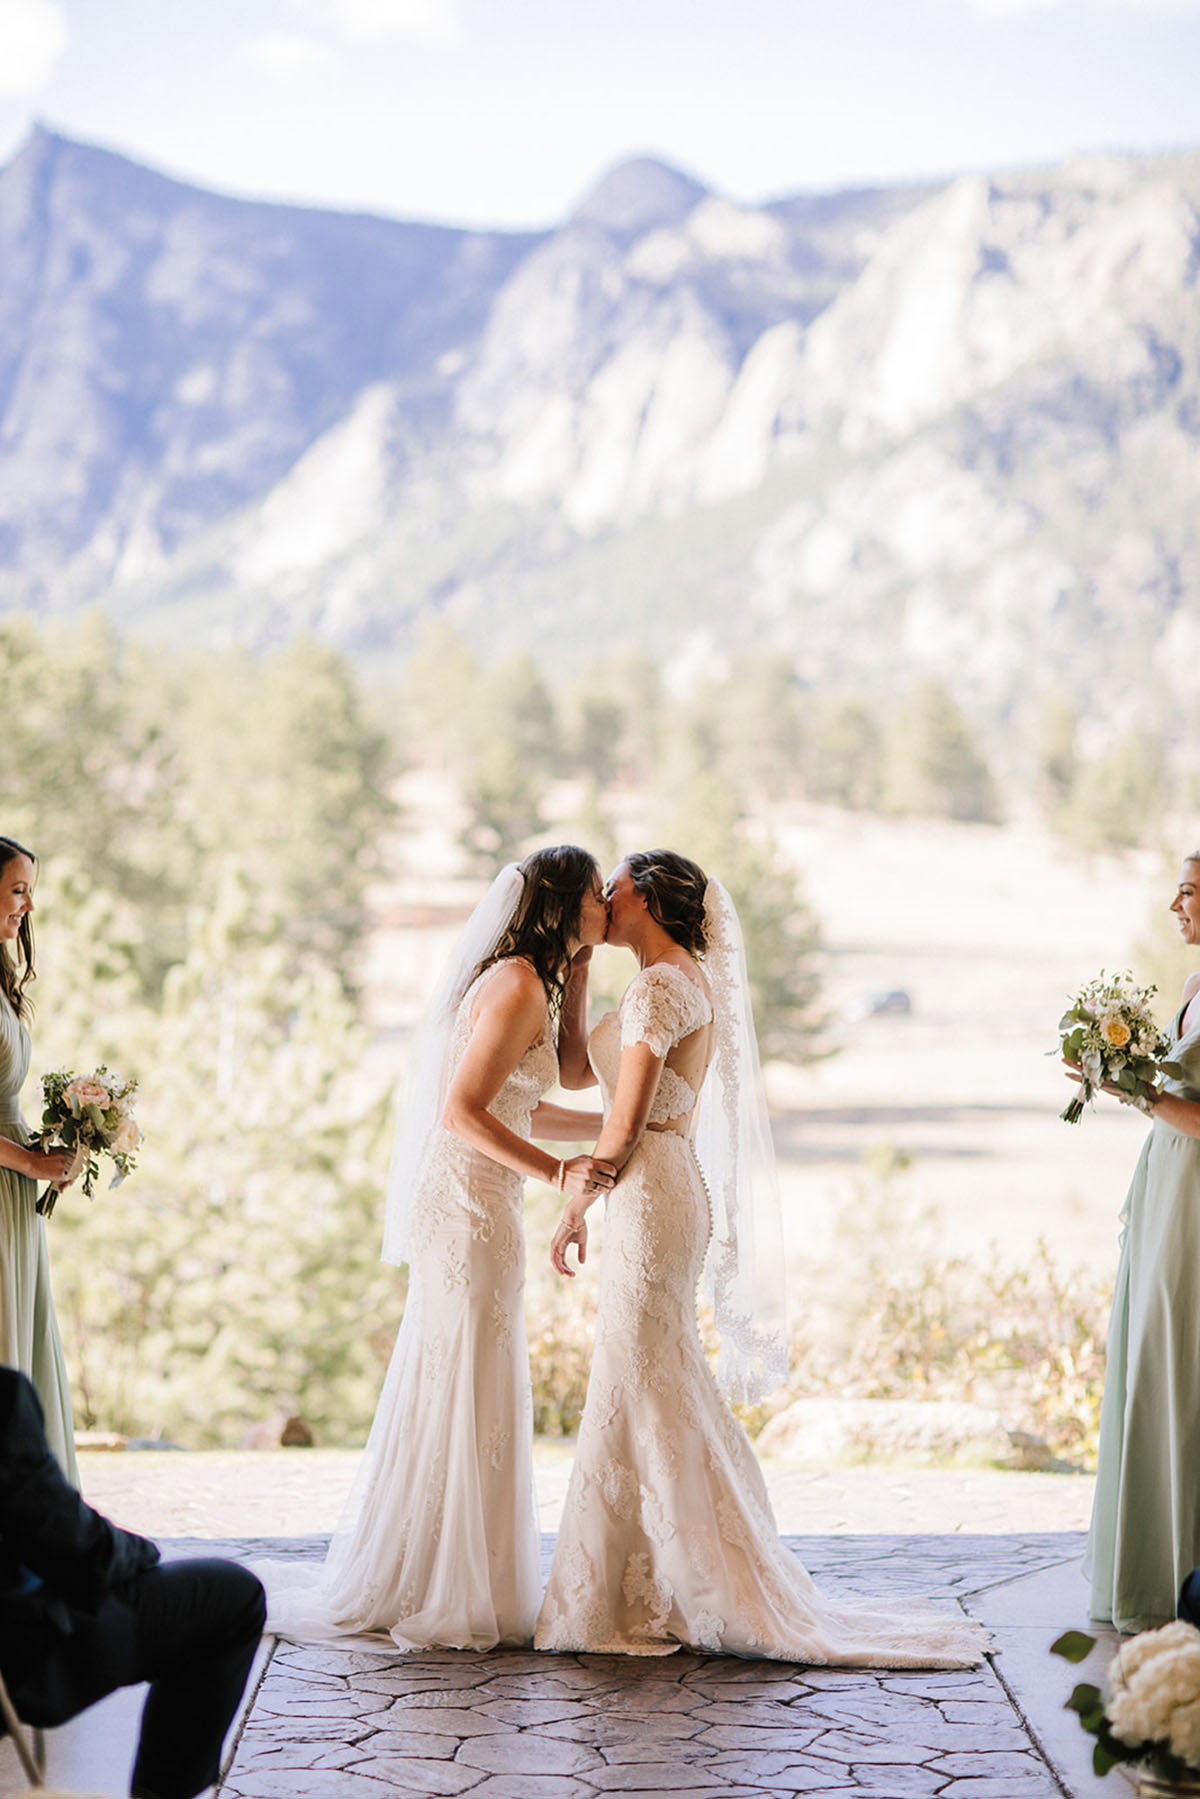 Rustic mountain wedding in the Colorado Rocky Mountains two brides lace white dresses veils kiss